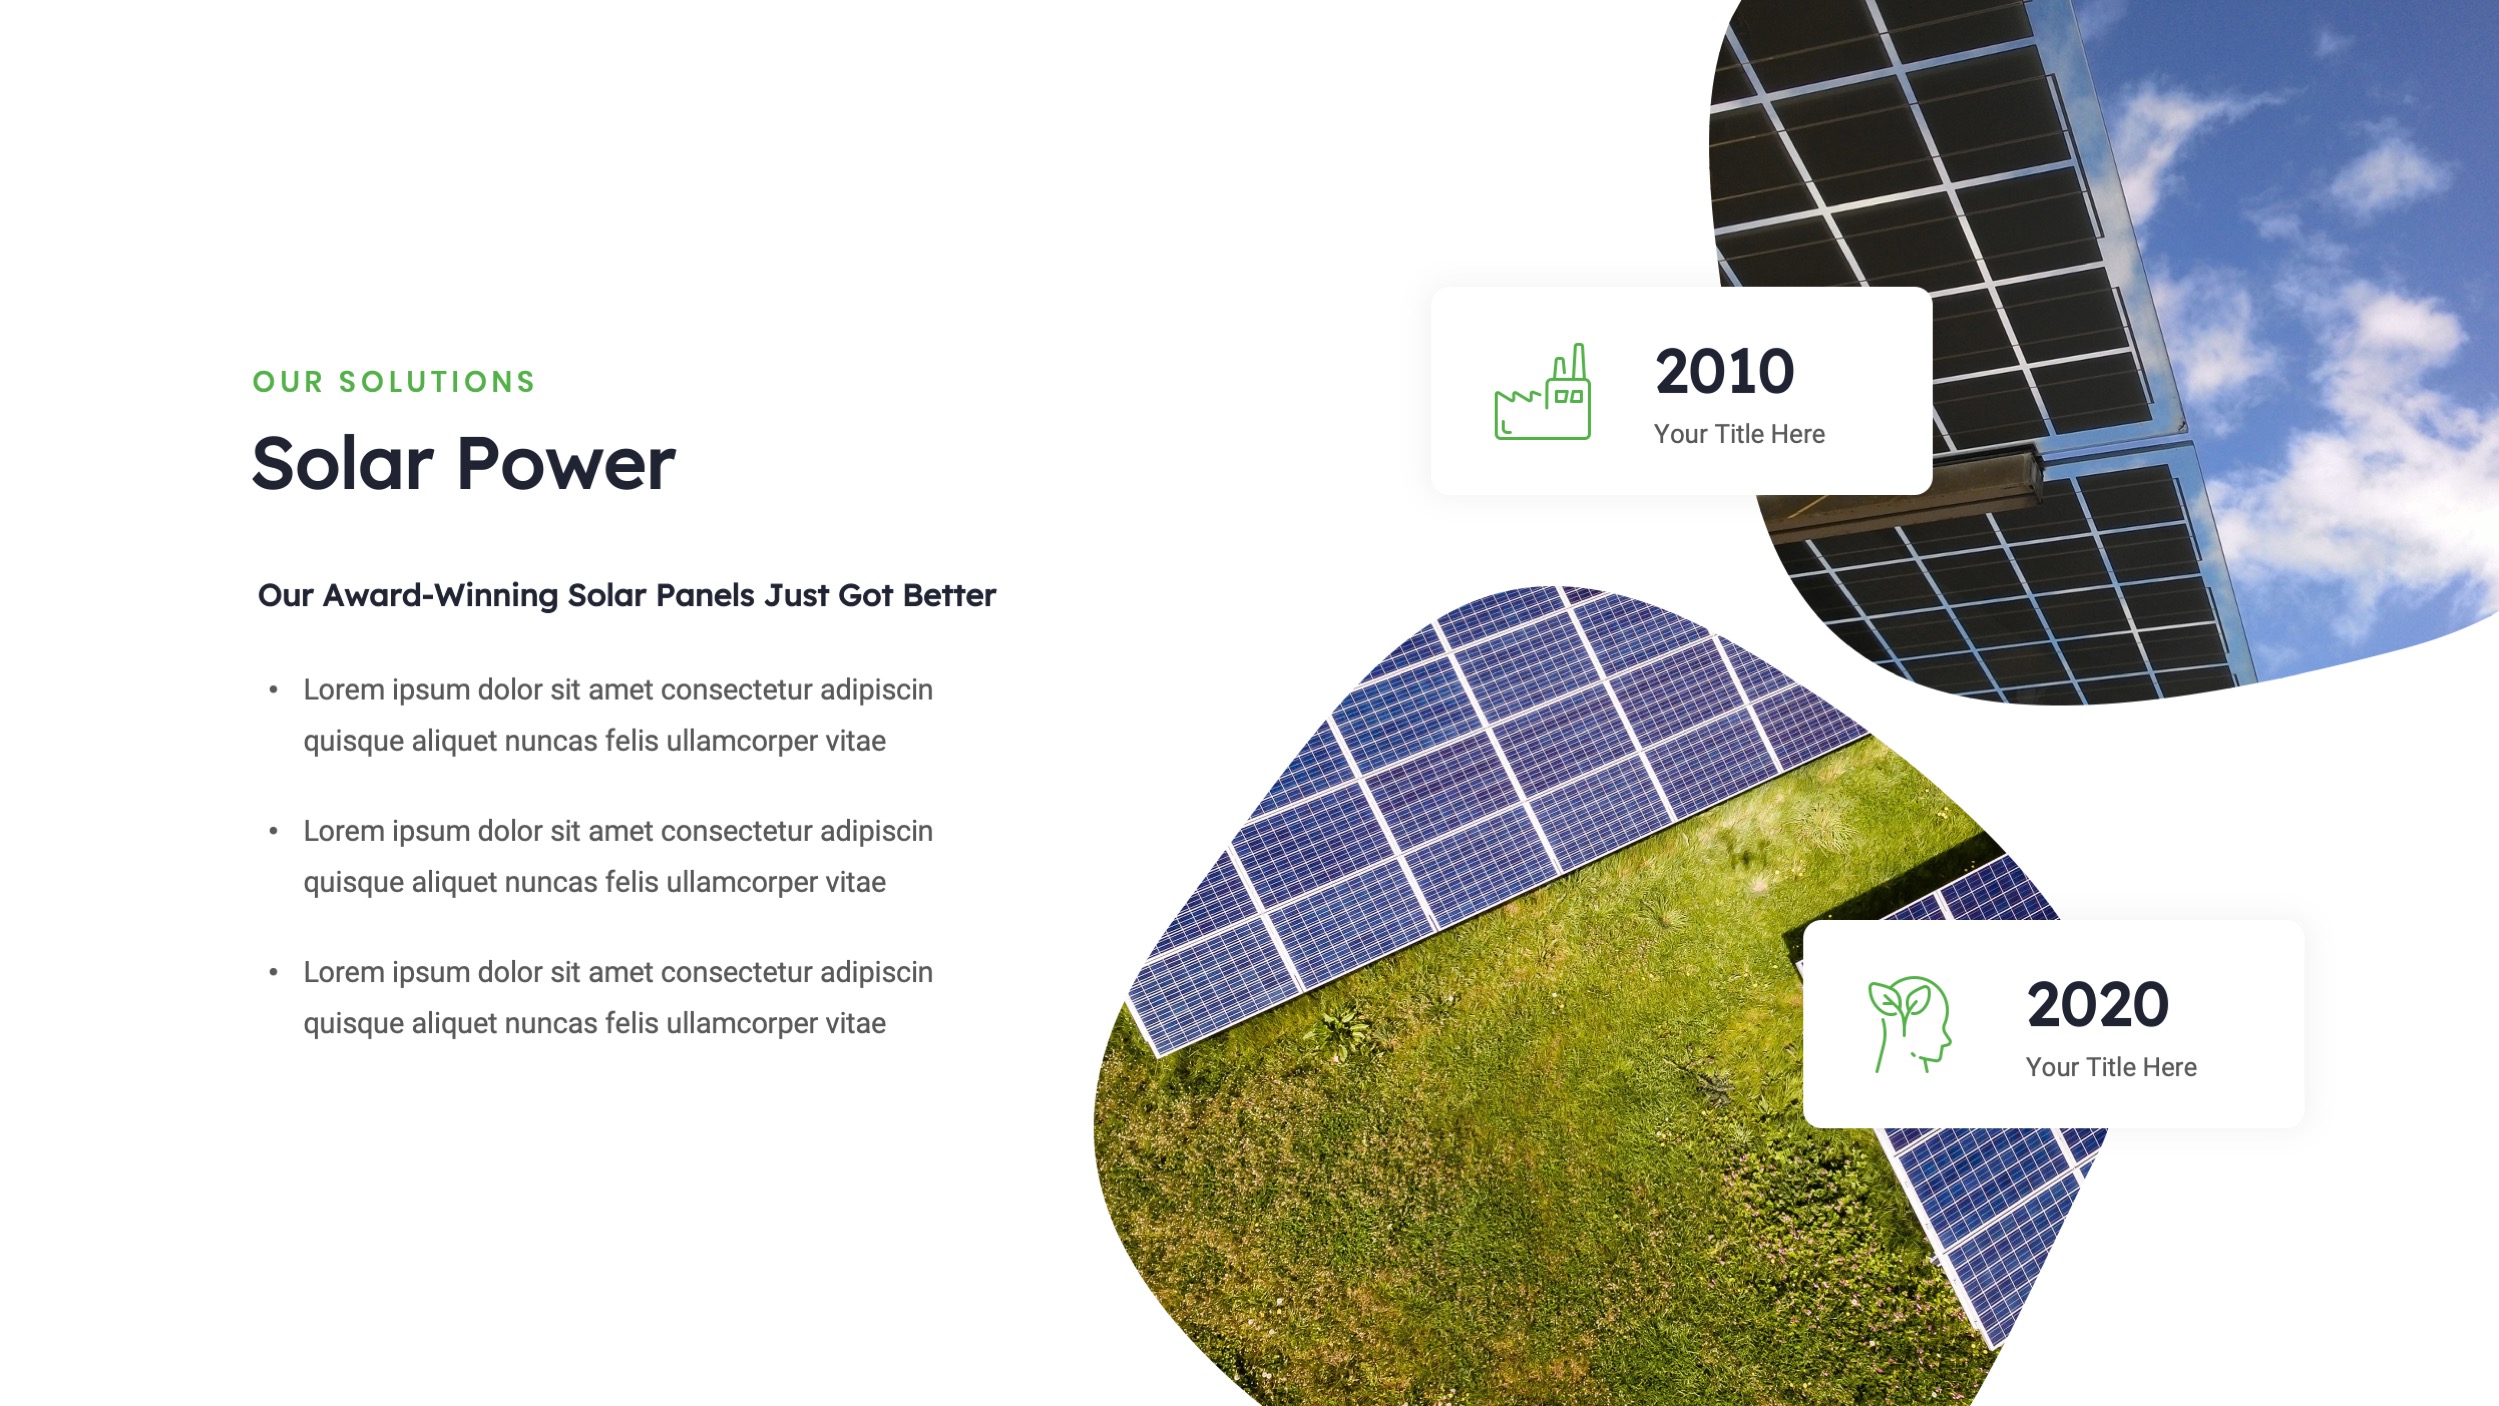 Renewable Energy Powerpoint Presentation Template by Krafted GraphicRiver